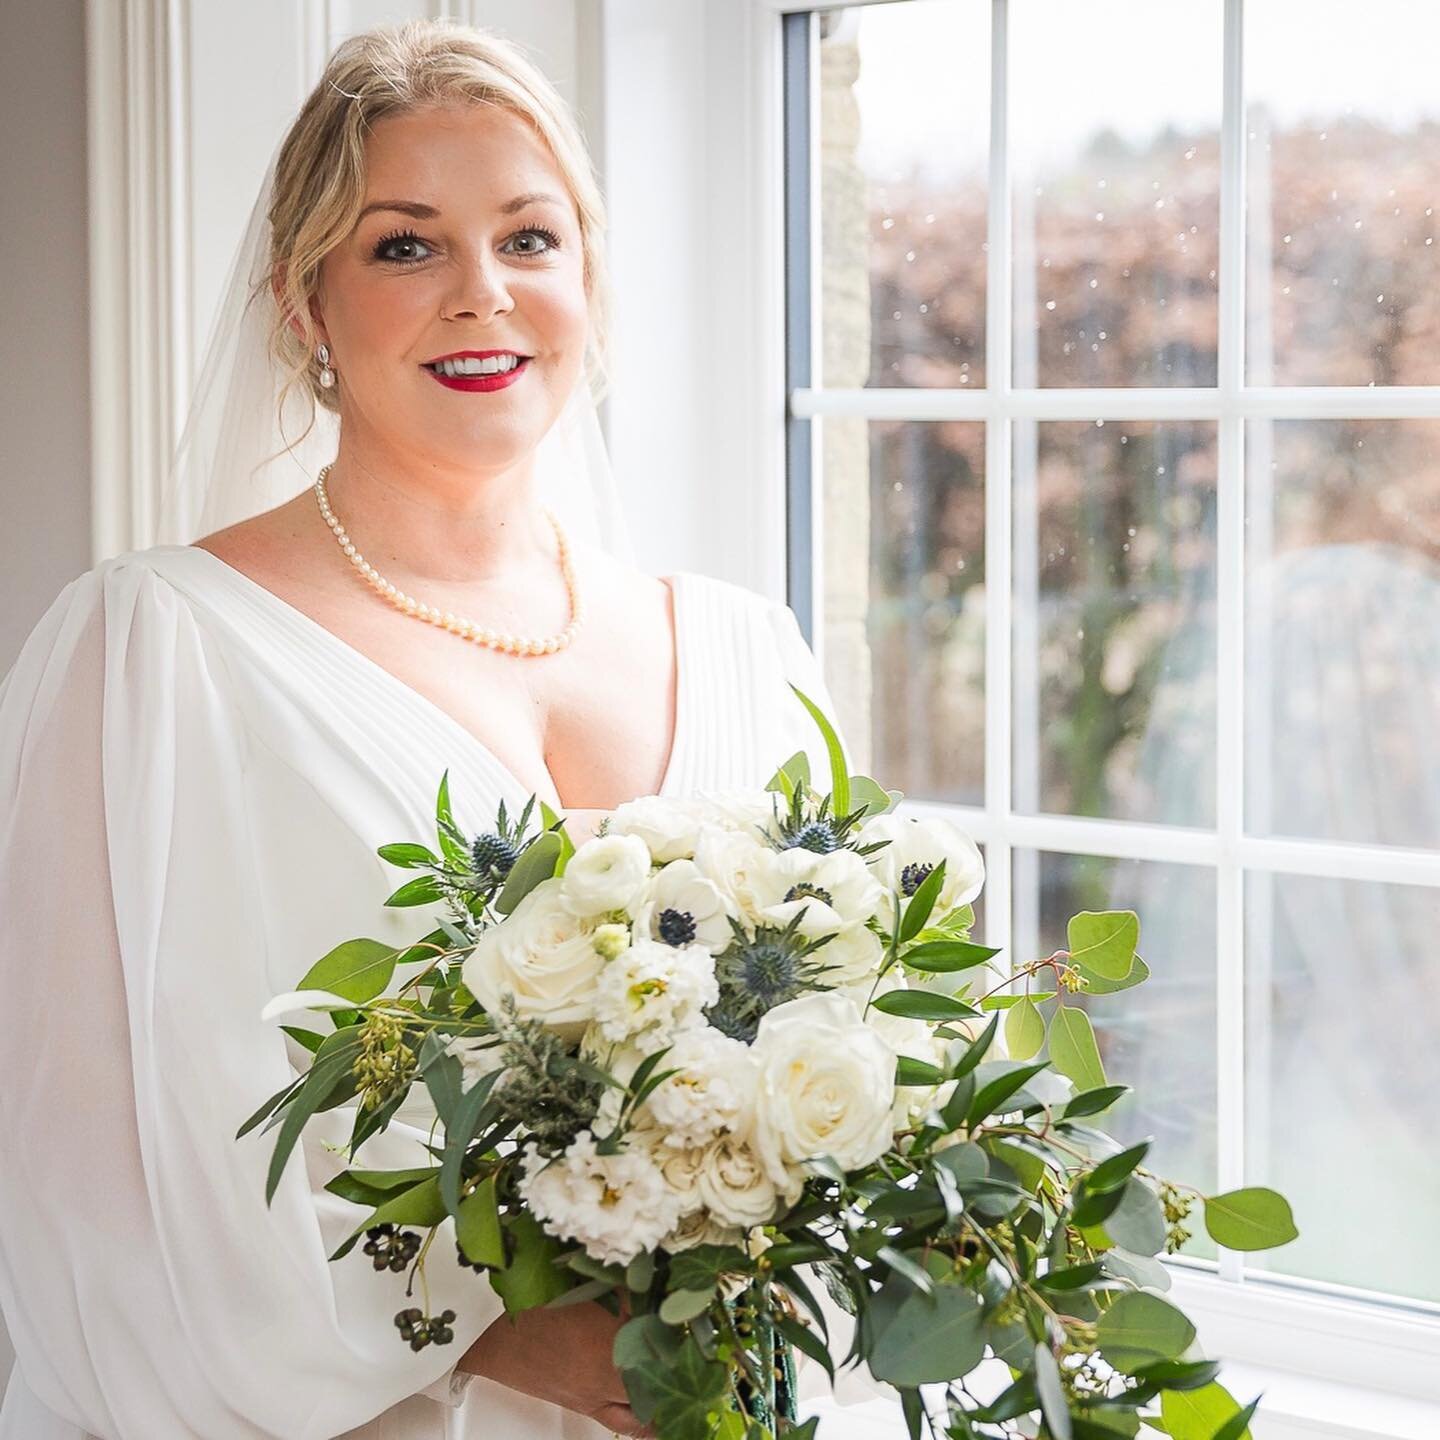 I love these images - Rachel looked so beautiful and Northumberland&rsquo;s soft morning light in late December was perfect x

@tomhibberdphotography 

#mindenwood #mindenwoodfloraldesign #weddingfloraldesign #weddingfloraldesigner #weddingflowers #n